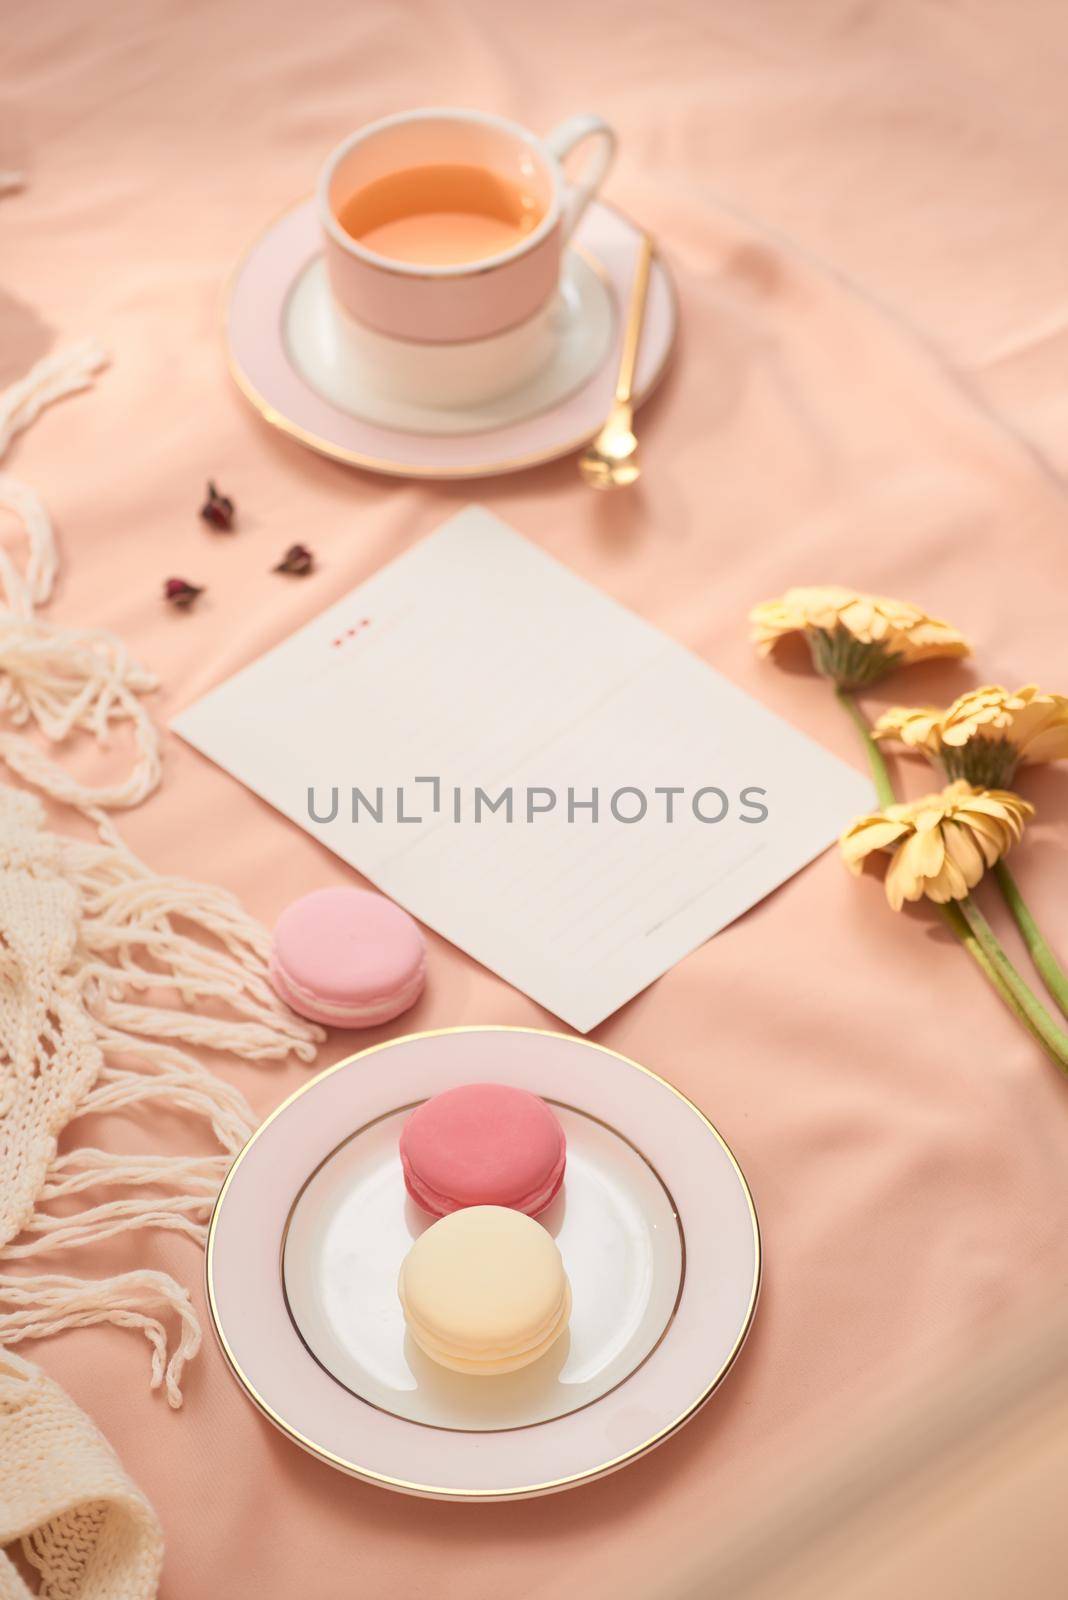 Envelope, flowers, and macarons with cup of tea on light background by makidotvn